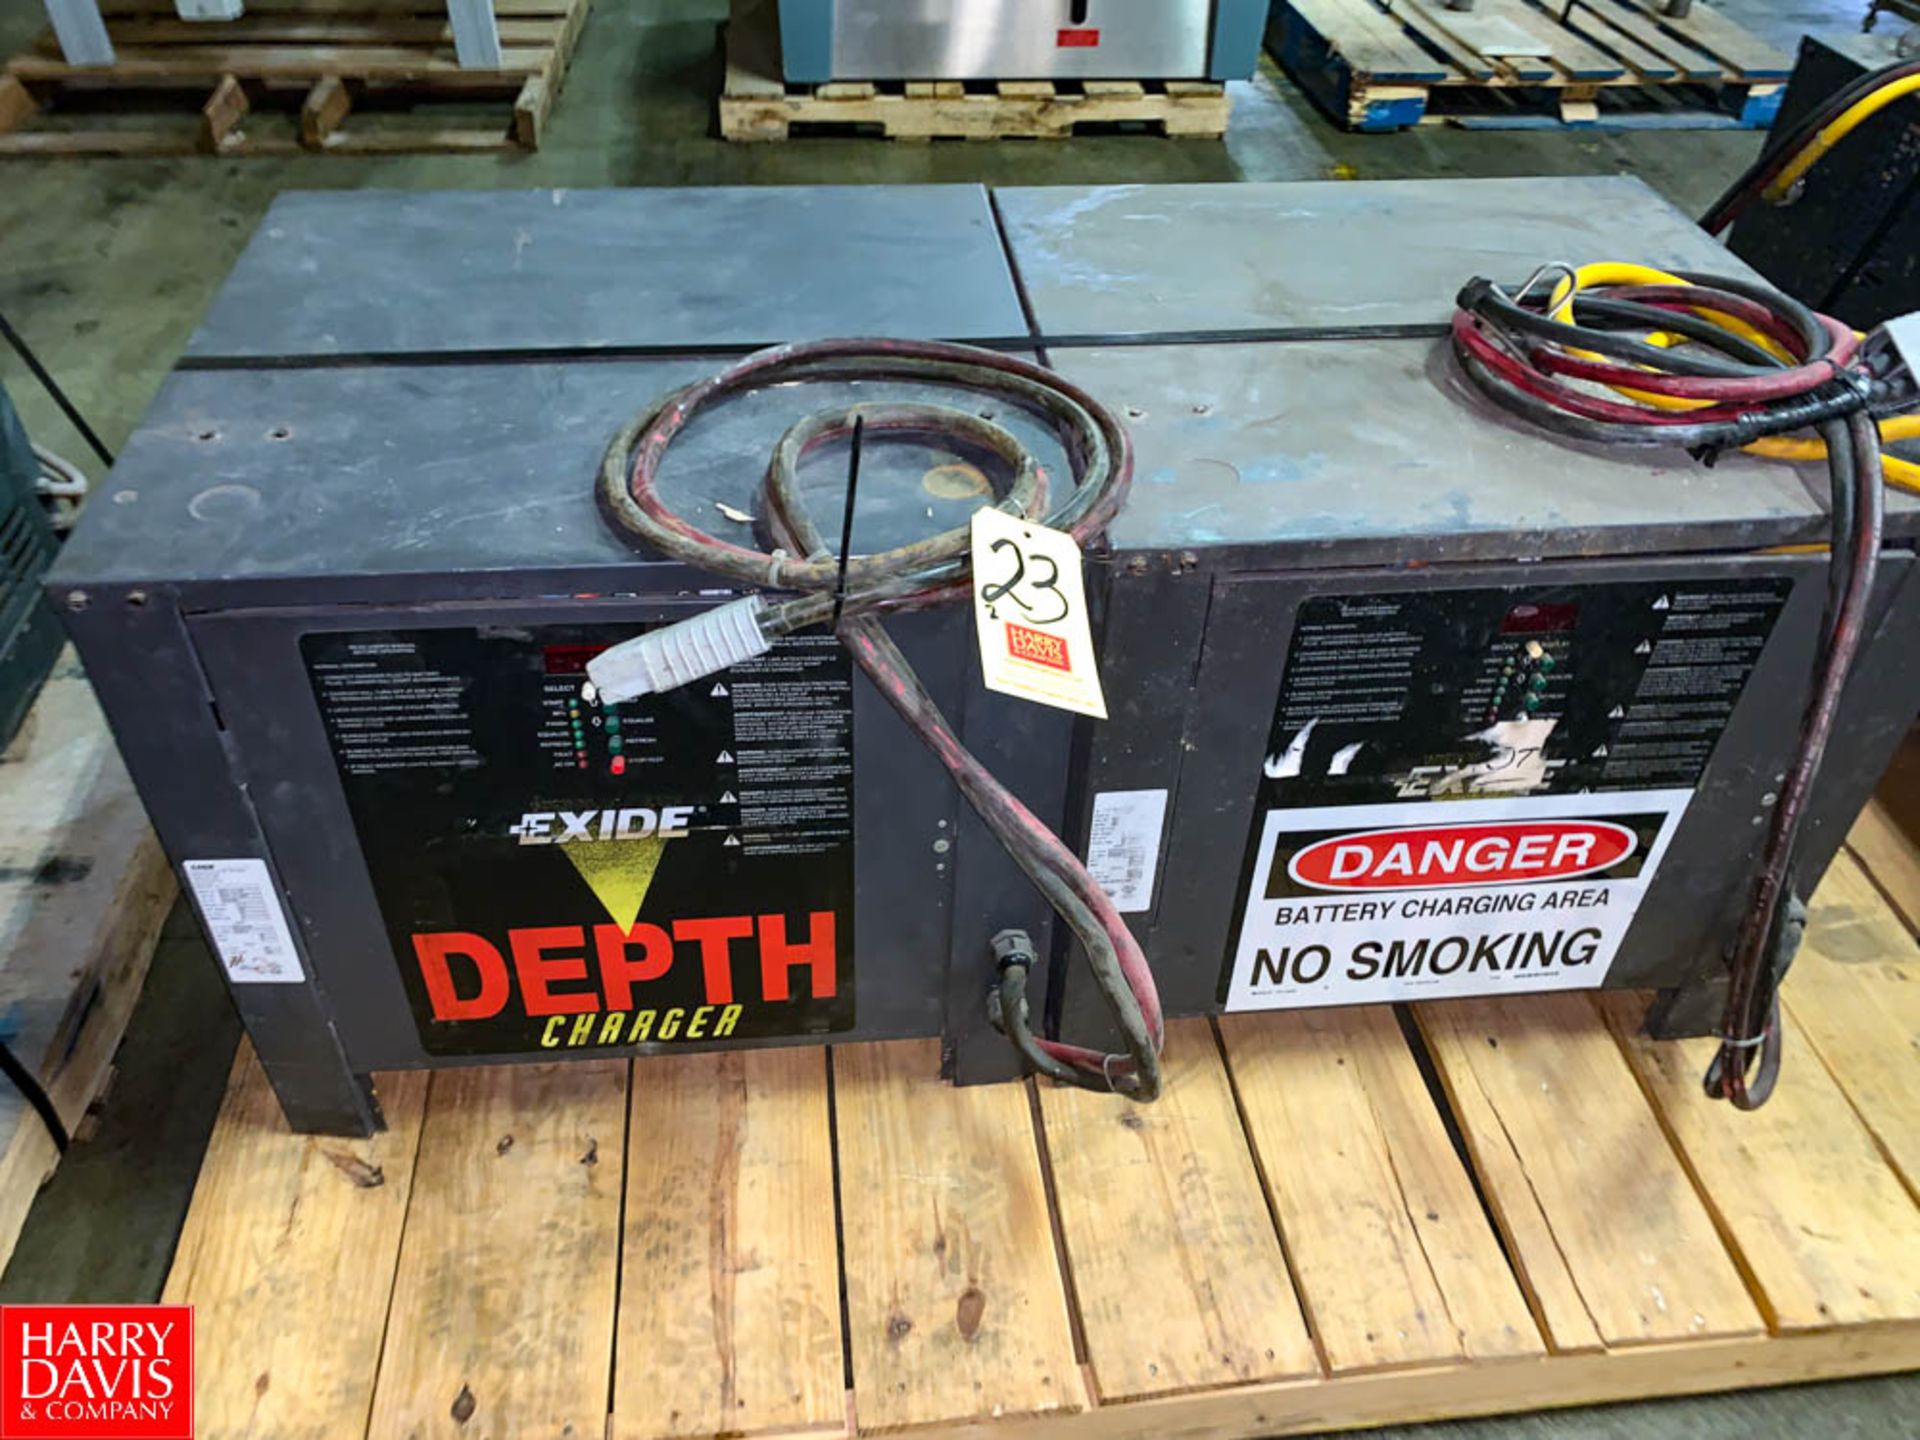 Exide Depth 36 Volt Battery Chargers Rigging Fee: $75 Location: Irwin, PA